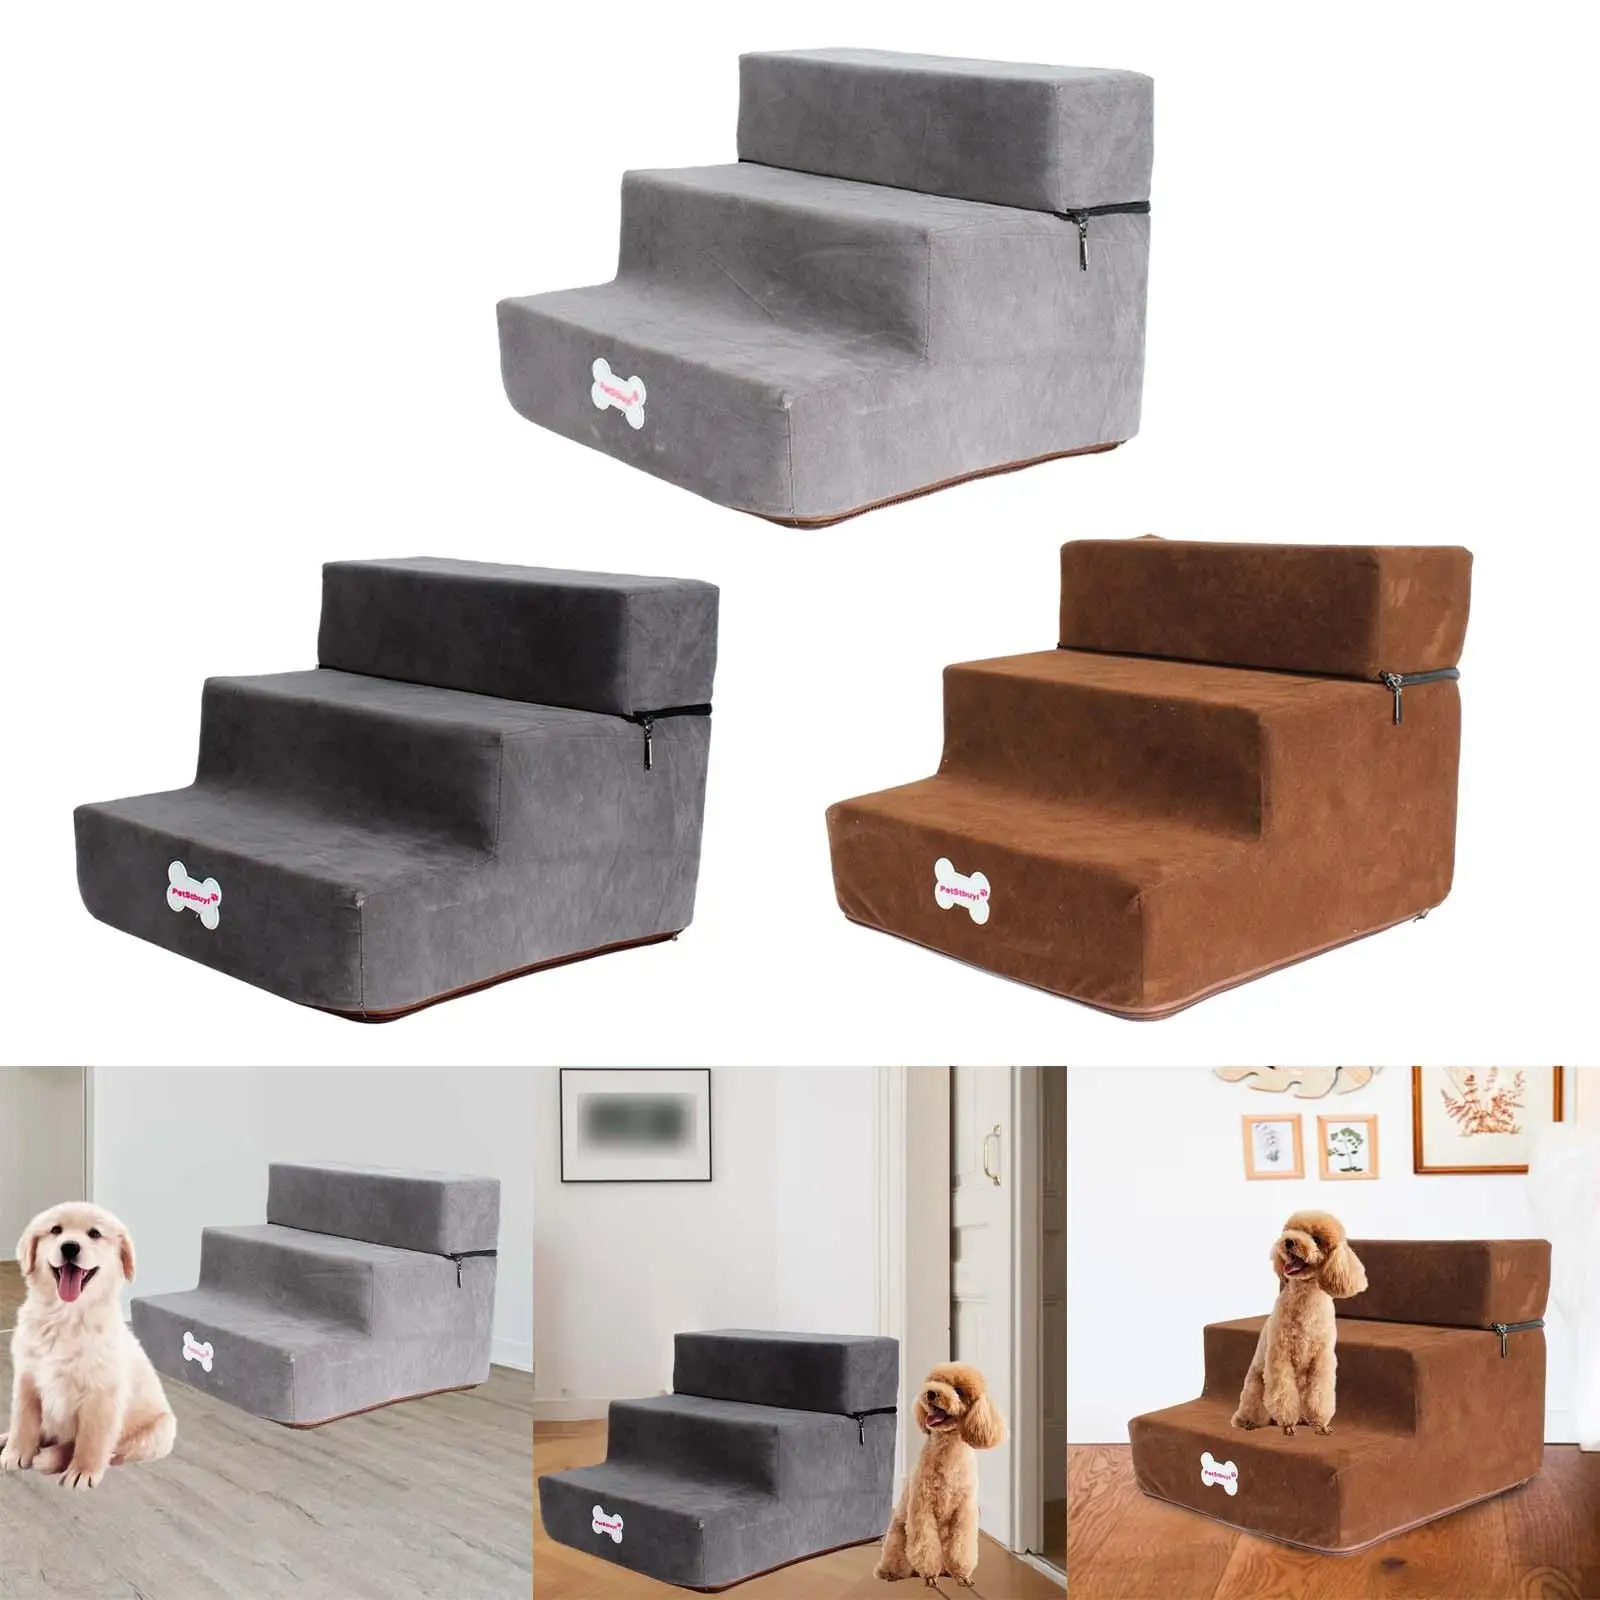 Dog Stairs Ladder Anti Slip Sponge Toys Step Platform 3 Steps Washable Supplies Couch for Puppy Large Dog Climbing High Bed Sofa